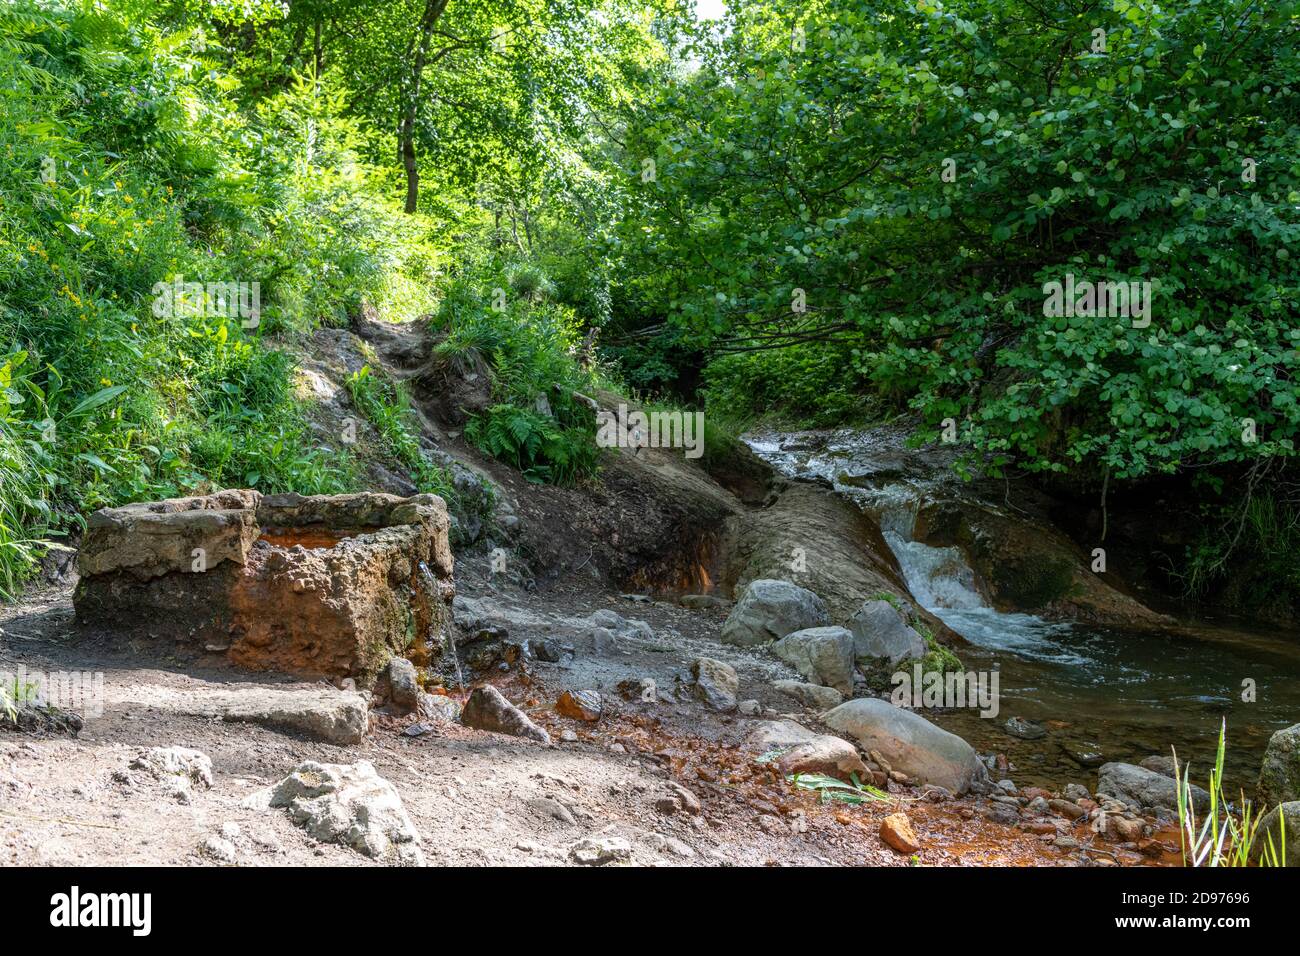 The Sainte Anne spring, natural gaseous spring of the Chaudefour valley, summer, Auvergne, France Stock Photo